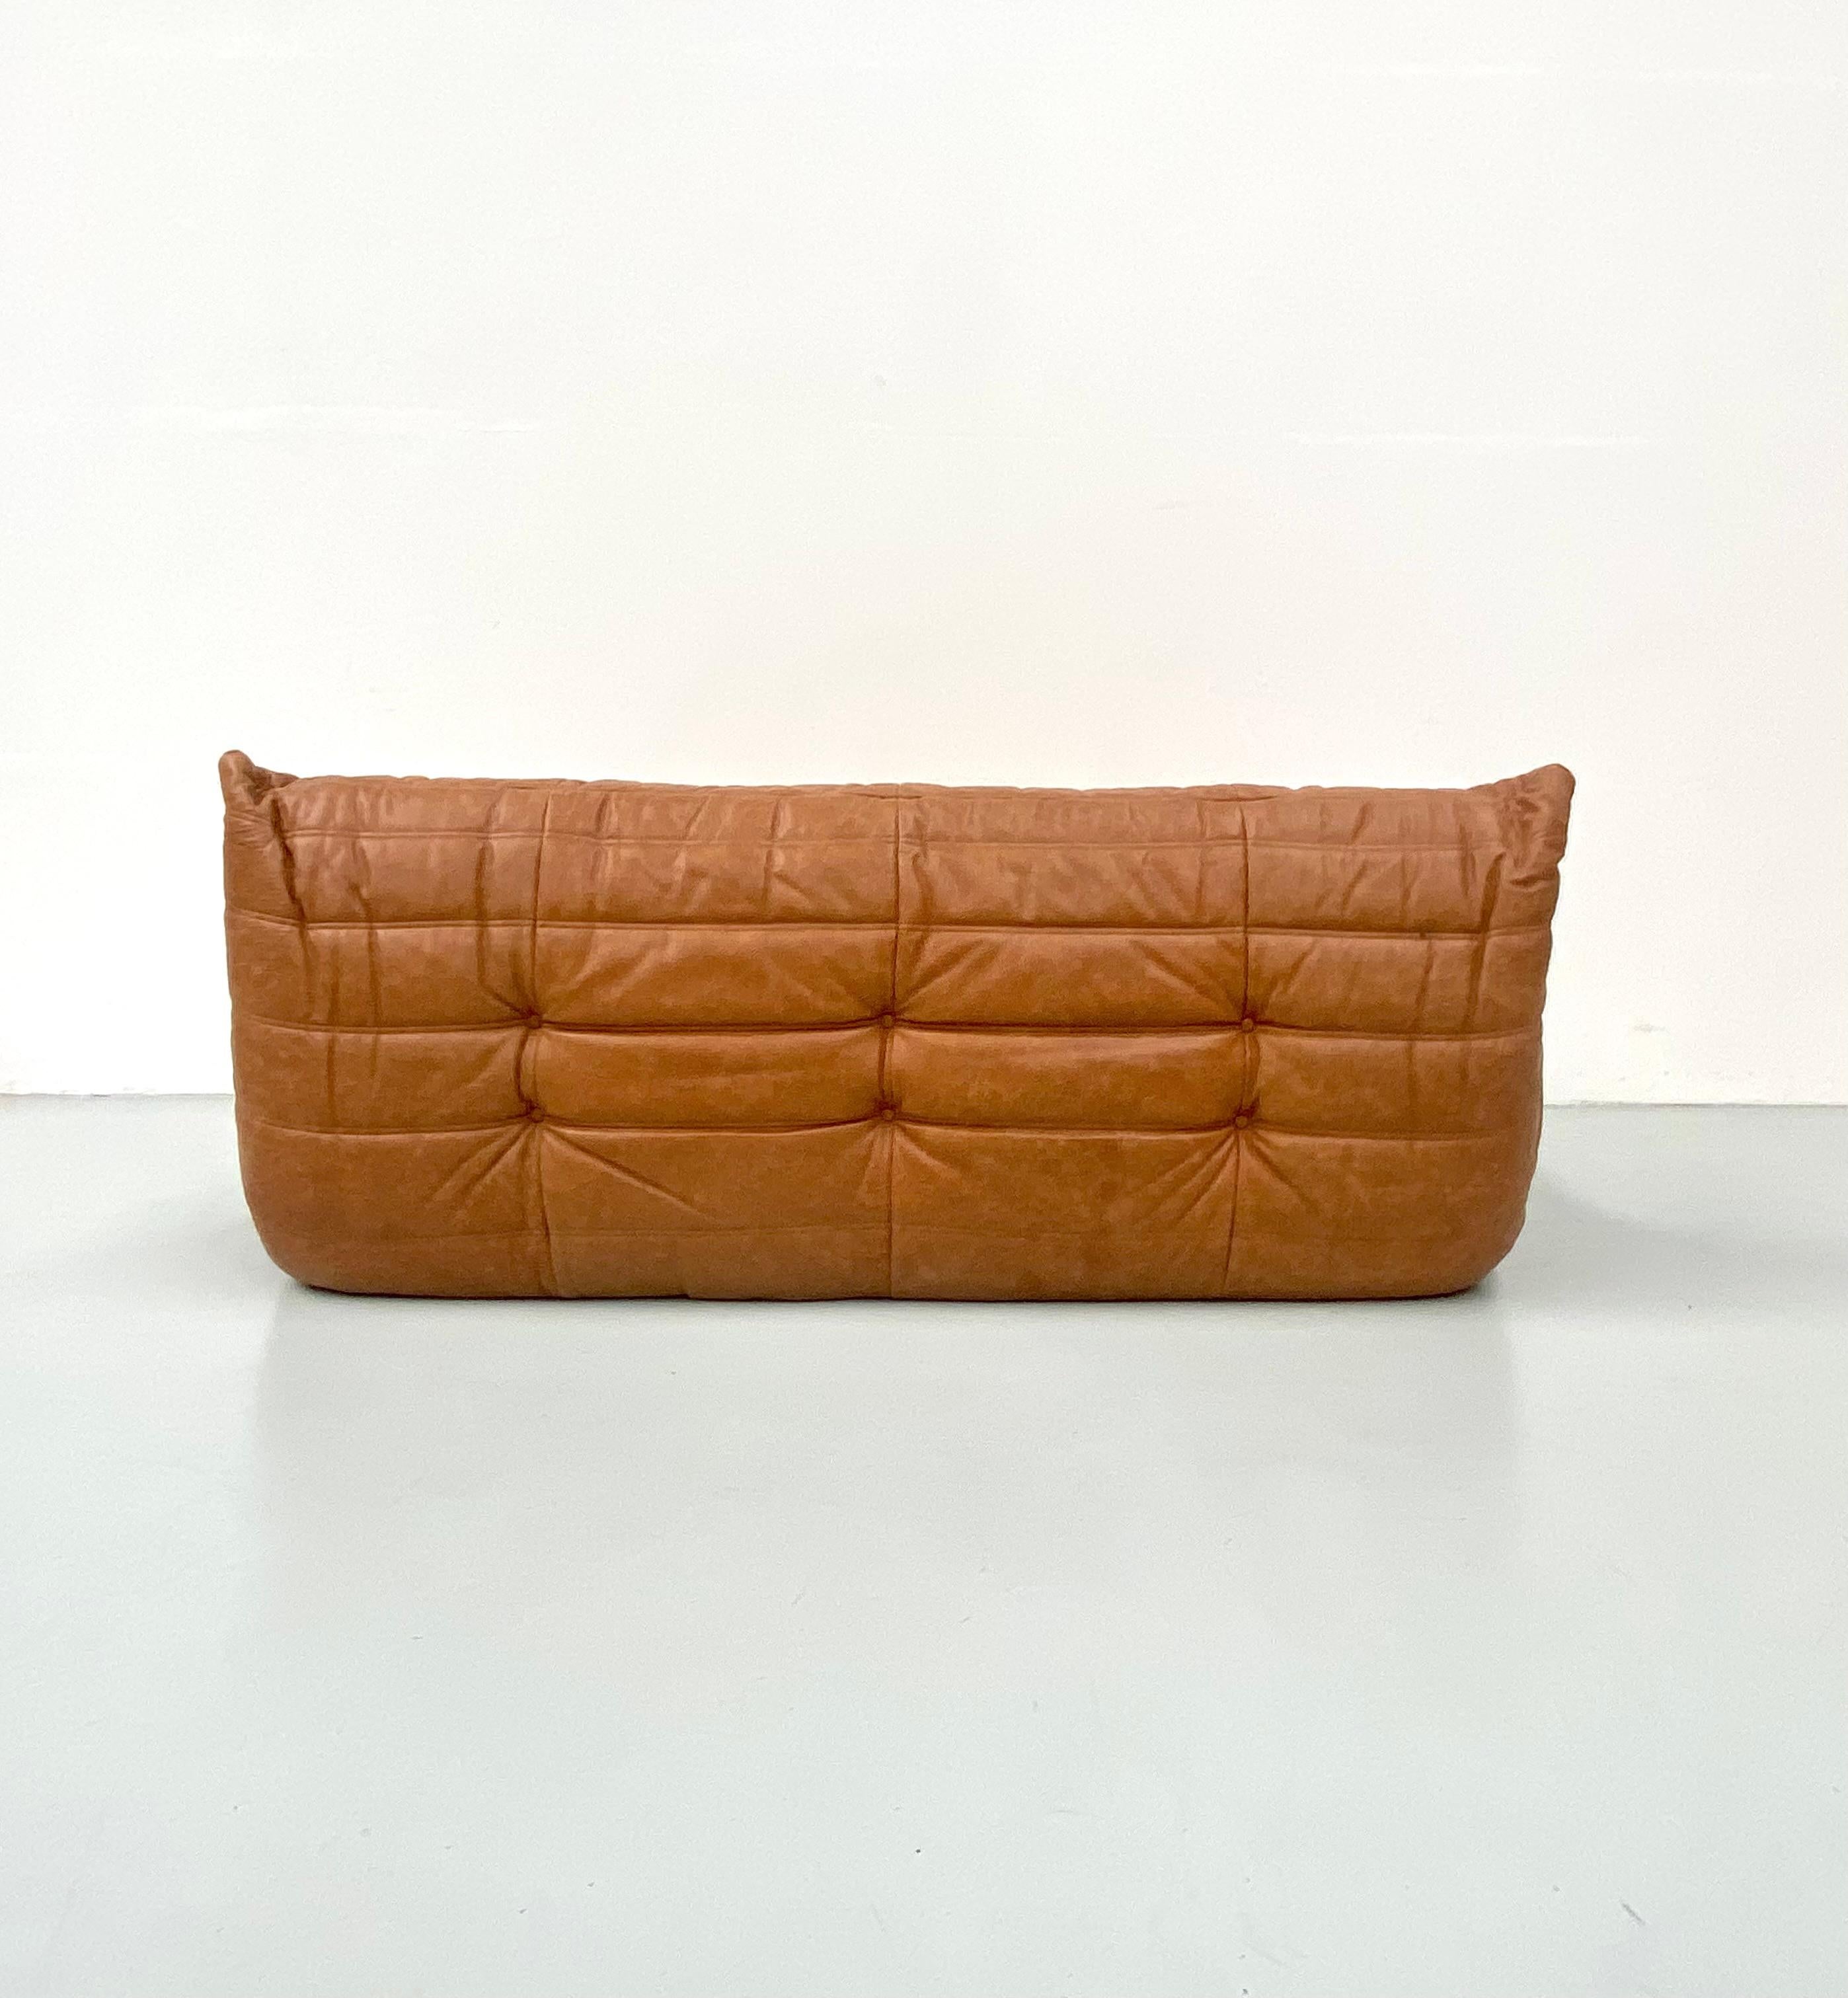 Vintage French Togo Sofa in Cognac Leather by M. Ducaroy for Ligne Roset, 1970s 3